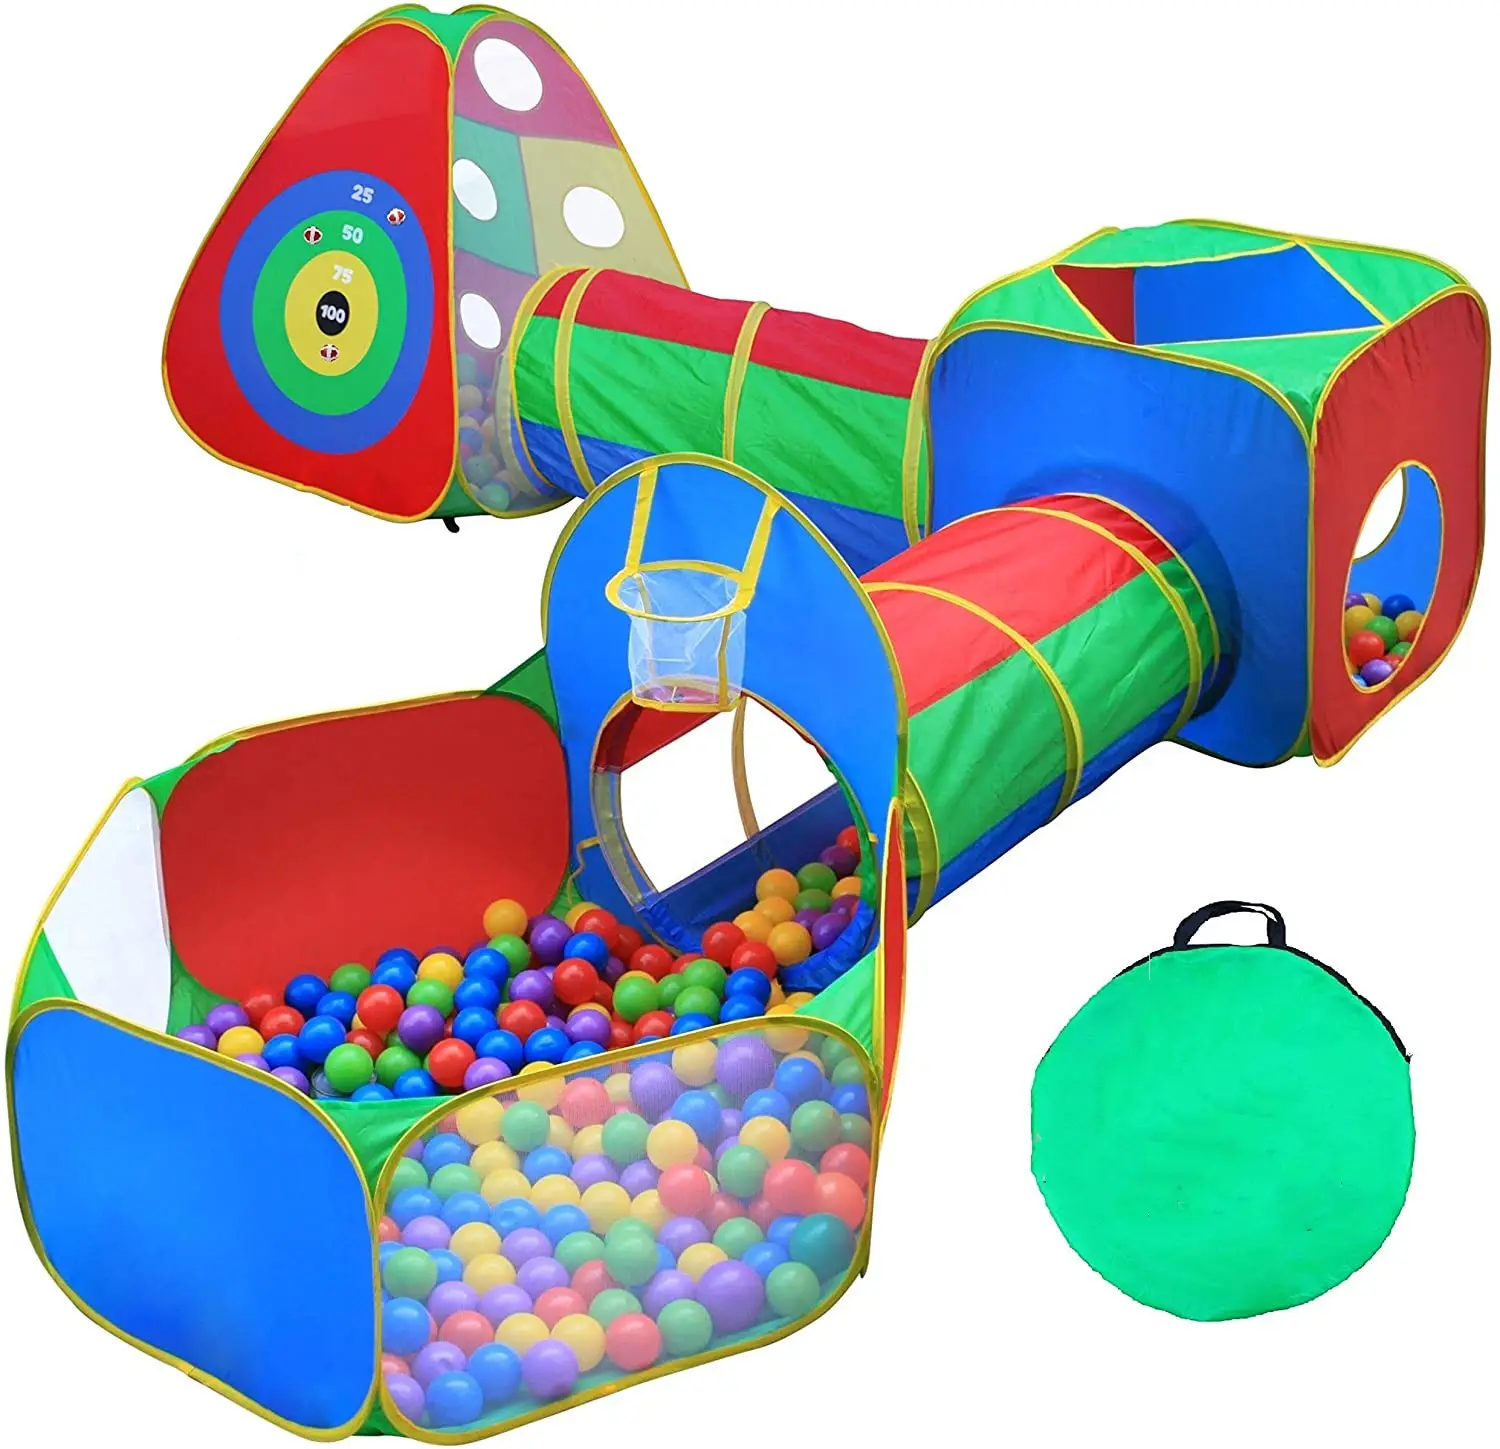 5pc Kids Ball Pit Tent and Tunnel Toddler Jungle Gym Baby Play Tent with Play Crawl Tunnel Toy for Boys infants Children